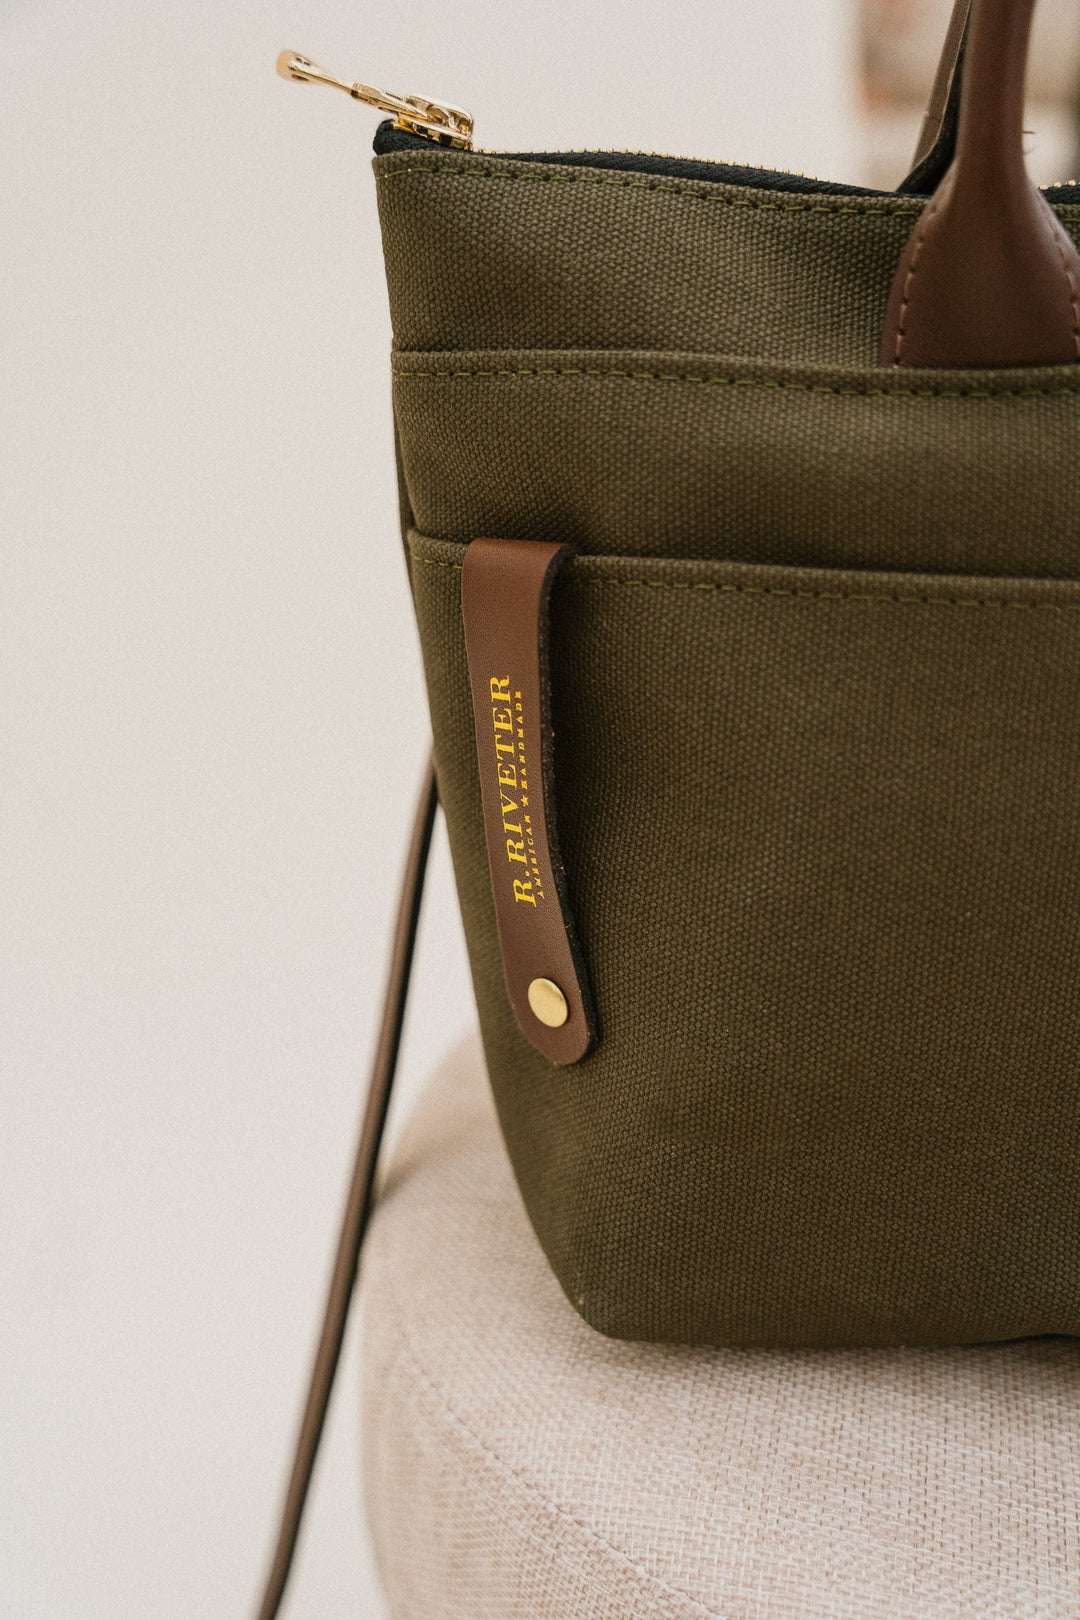 Dot | Signature Fatigue Canvas + Brown Leather